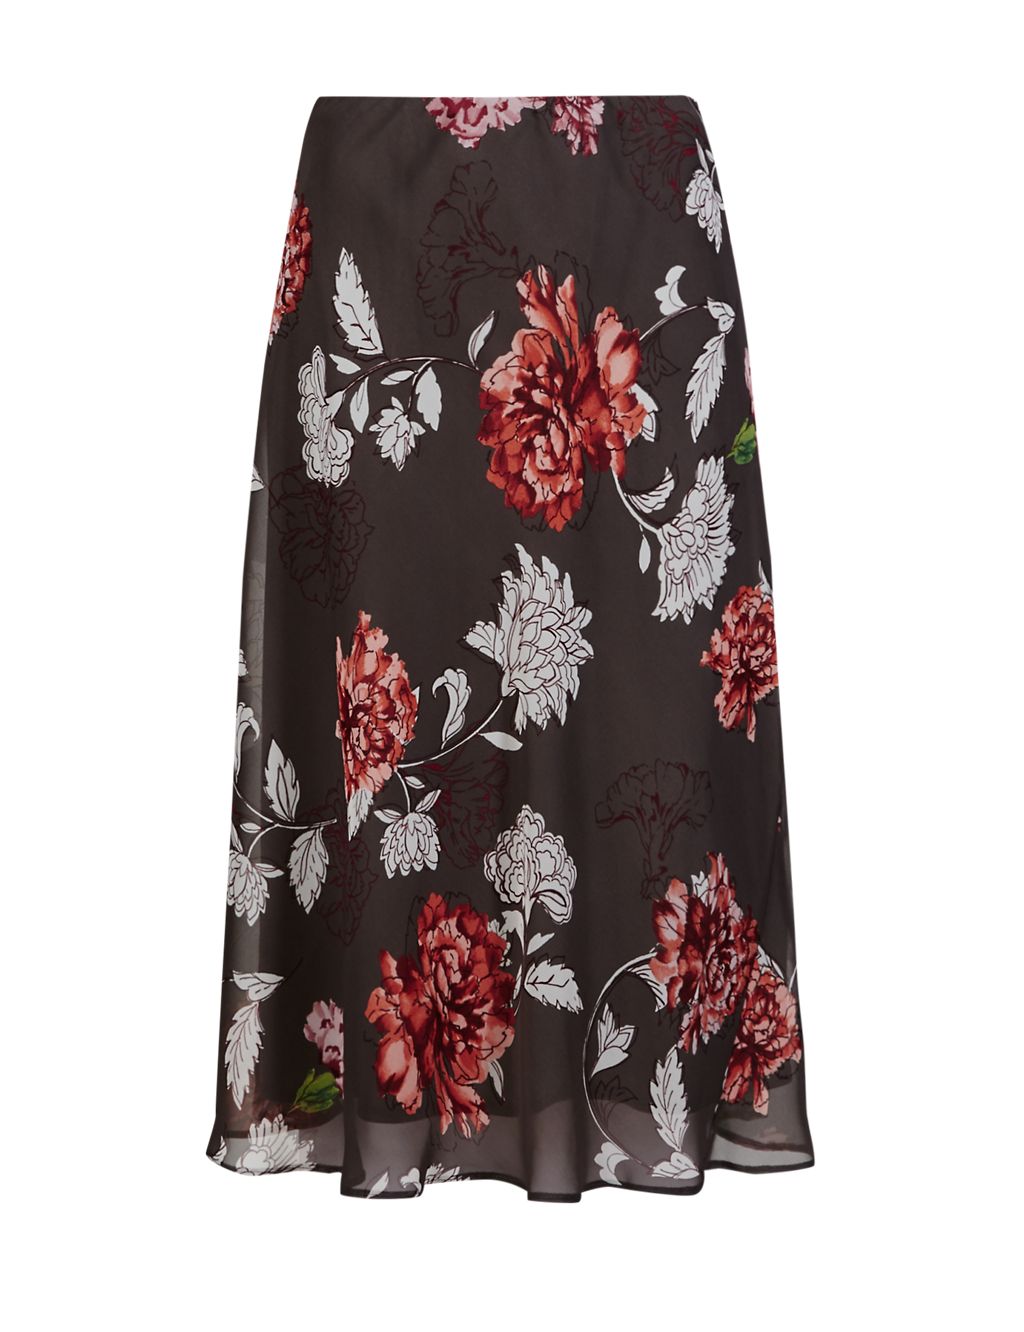 Floral A-Line Skirt 1 of 4